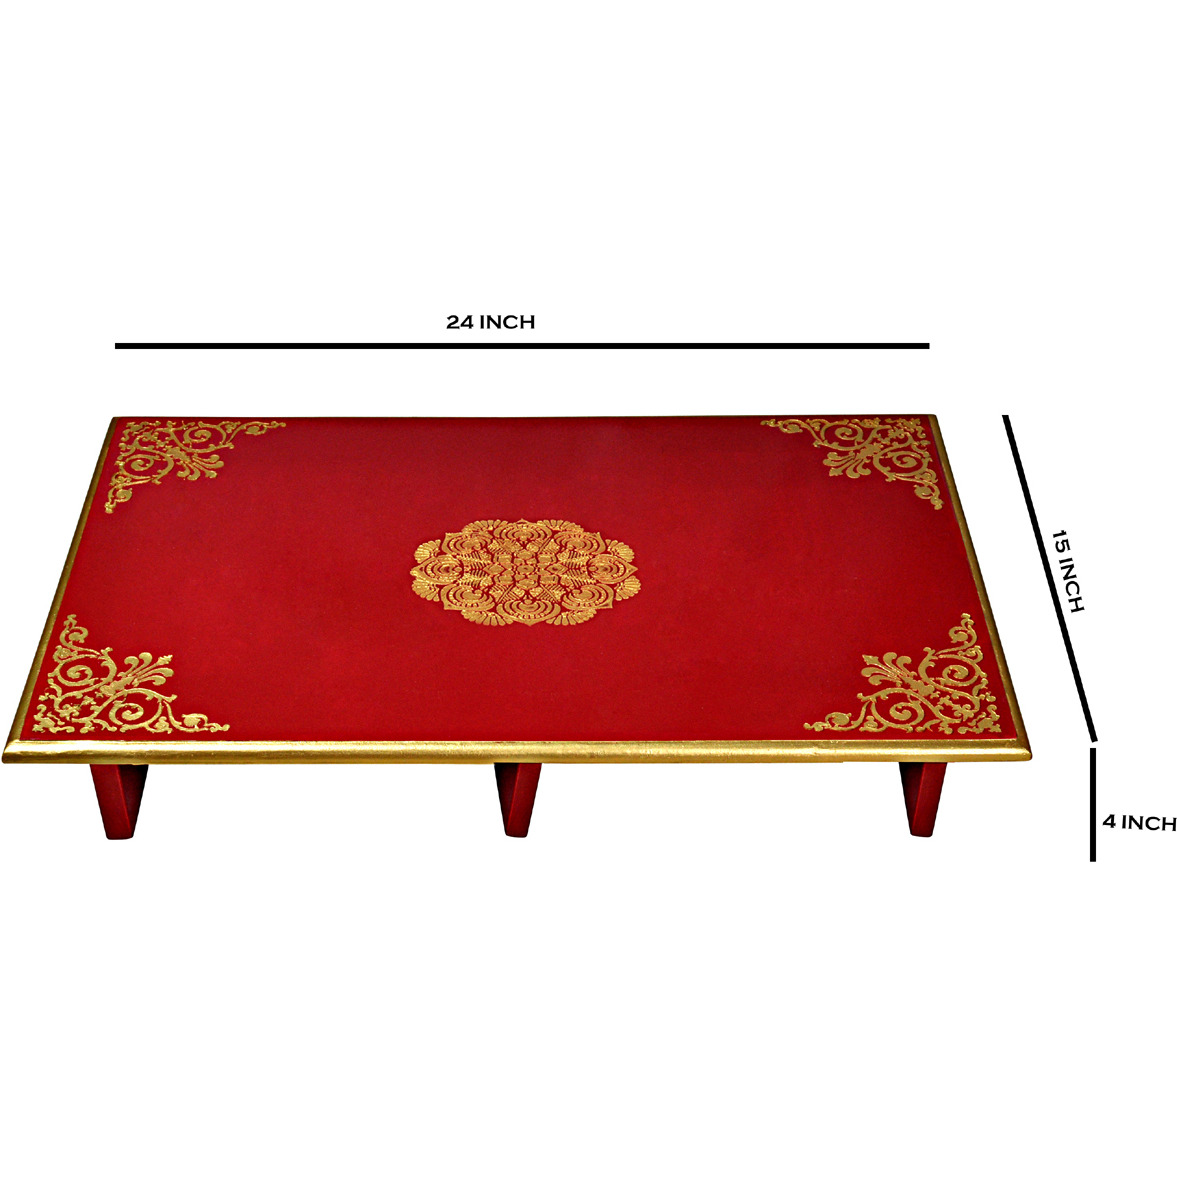 Indian Wooden Hand painted Chowki Pata for Rakhi Gift End Table Low High Stool (Size: 24X15X4, Color: Red)